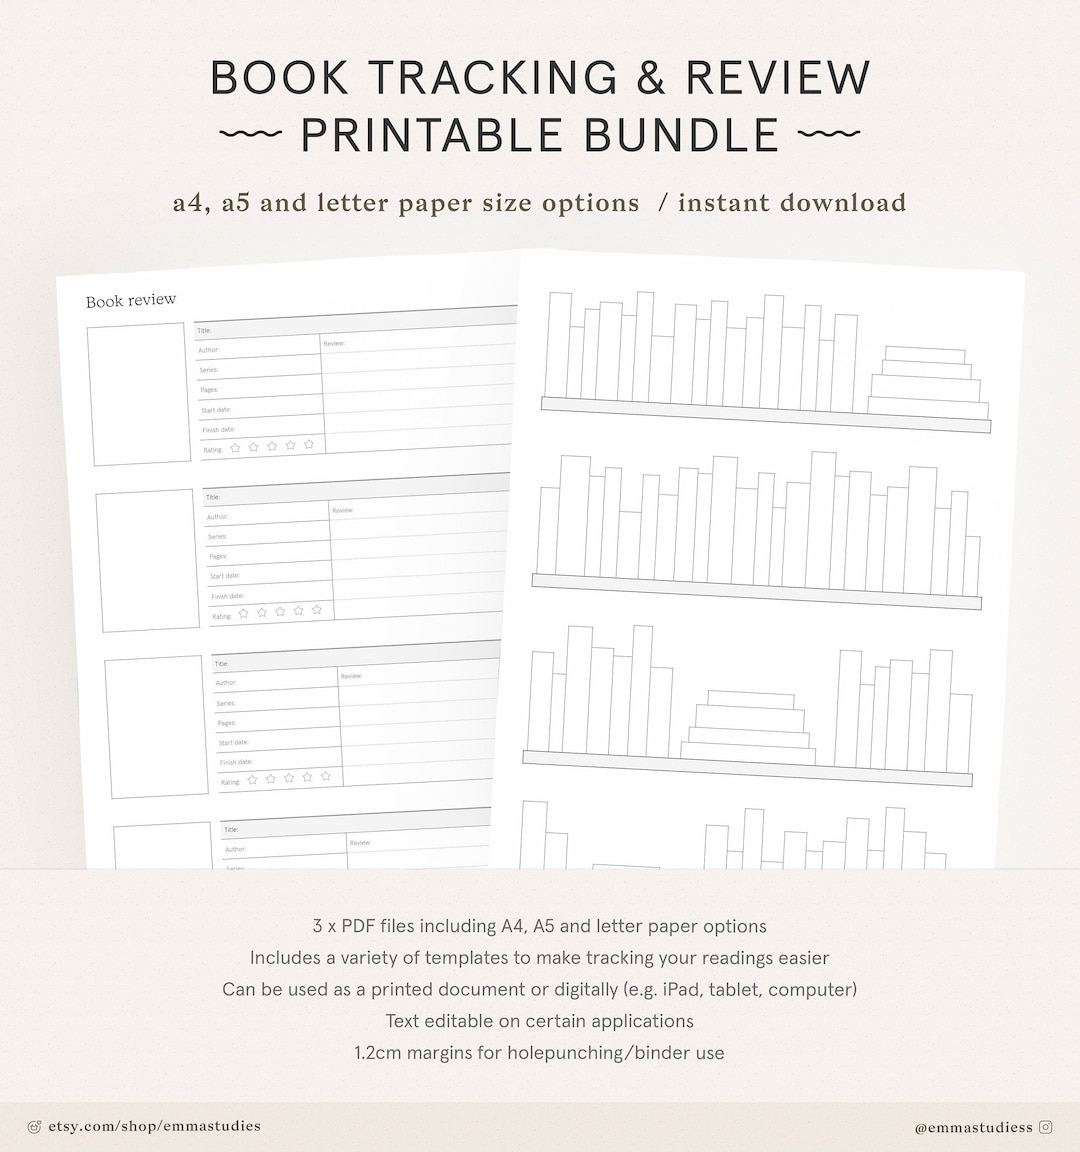 Book Rating Journal: Reading Log and Book Tracker: R., Agnes